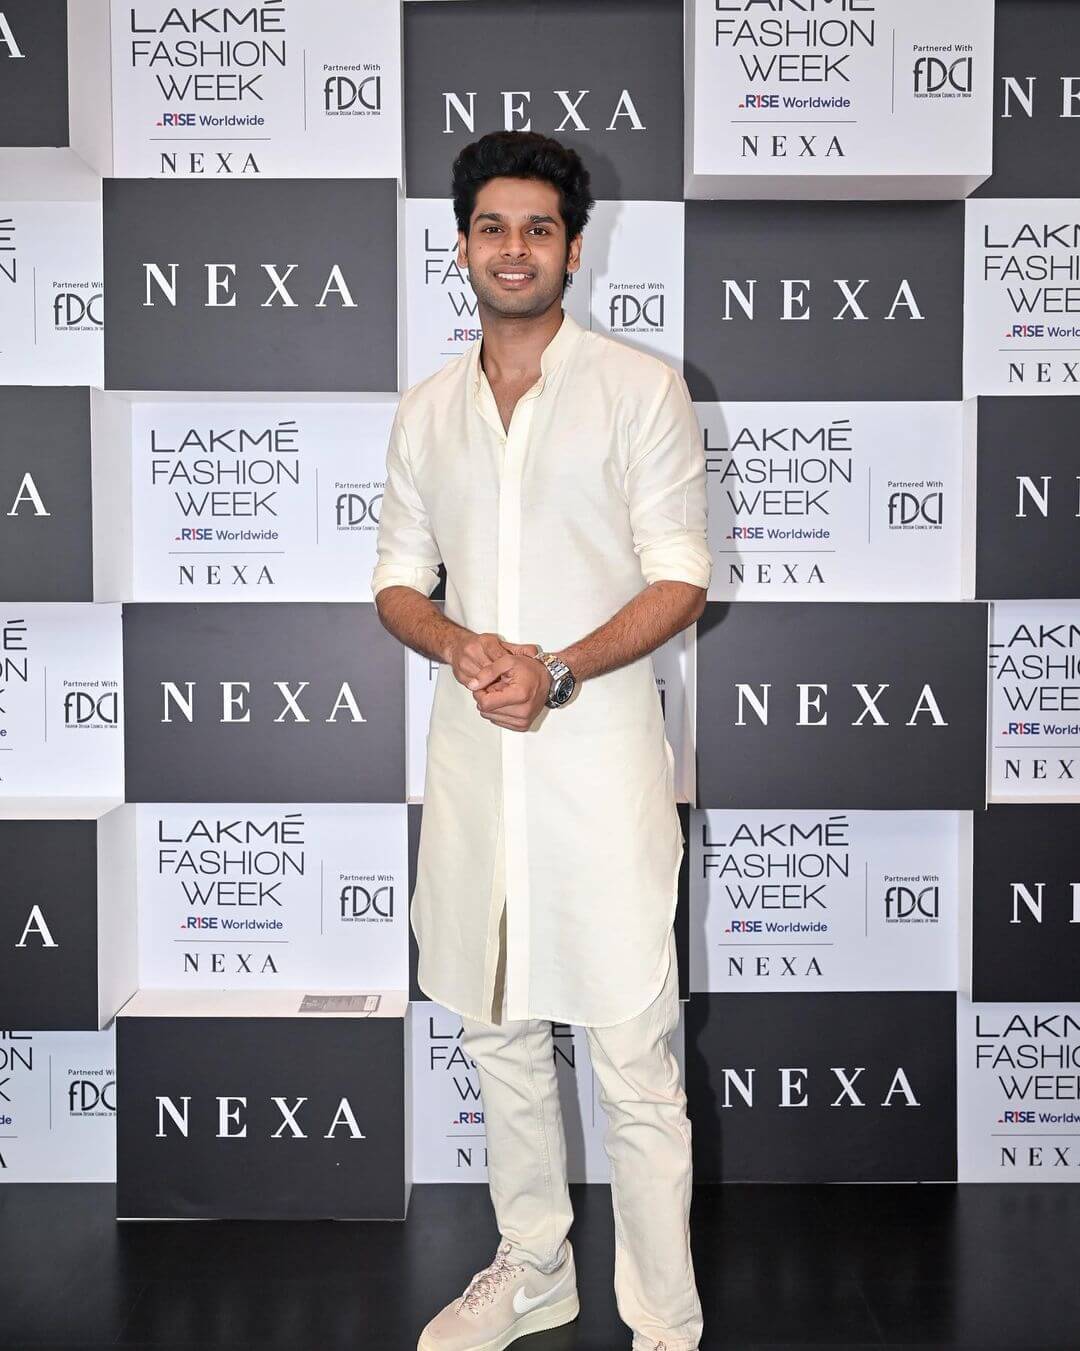 Lakme Fashion Week Bollywood Celebrities Spotted At The Runway - Abhimanyu Dasani Was Spotted In a White Kurta Pajama At Lakme Fashion Week